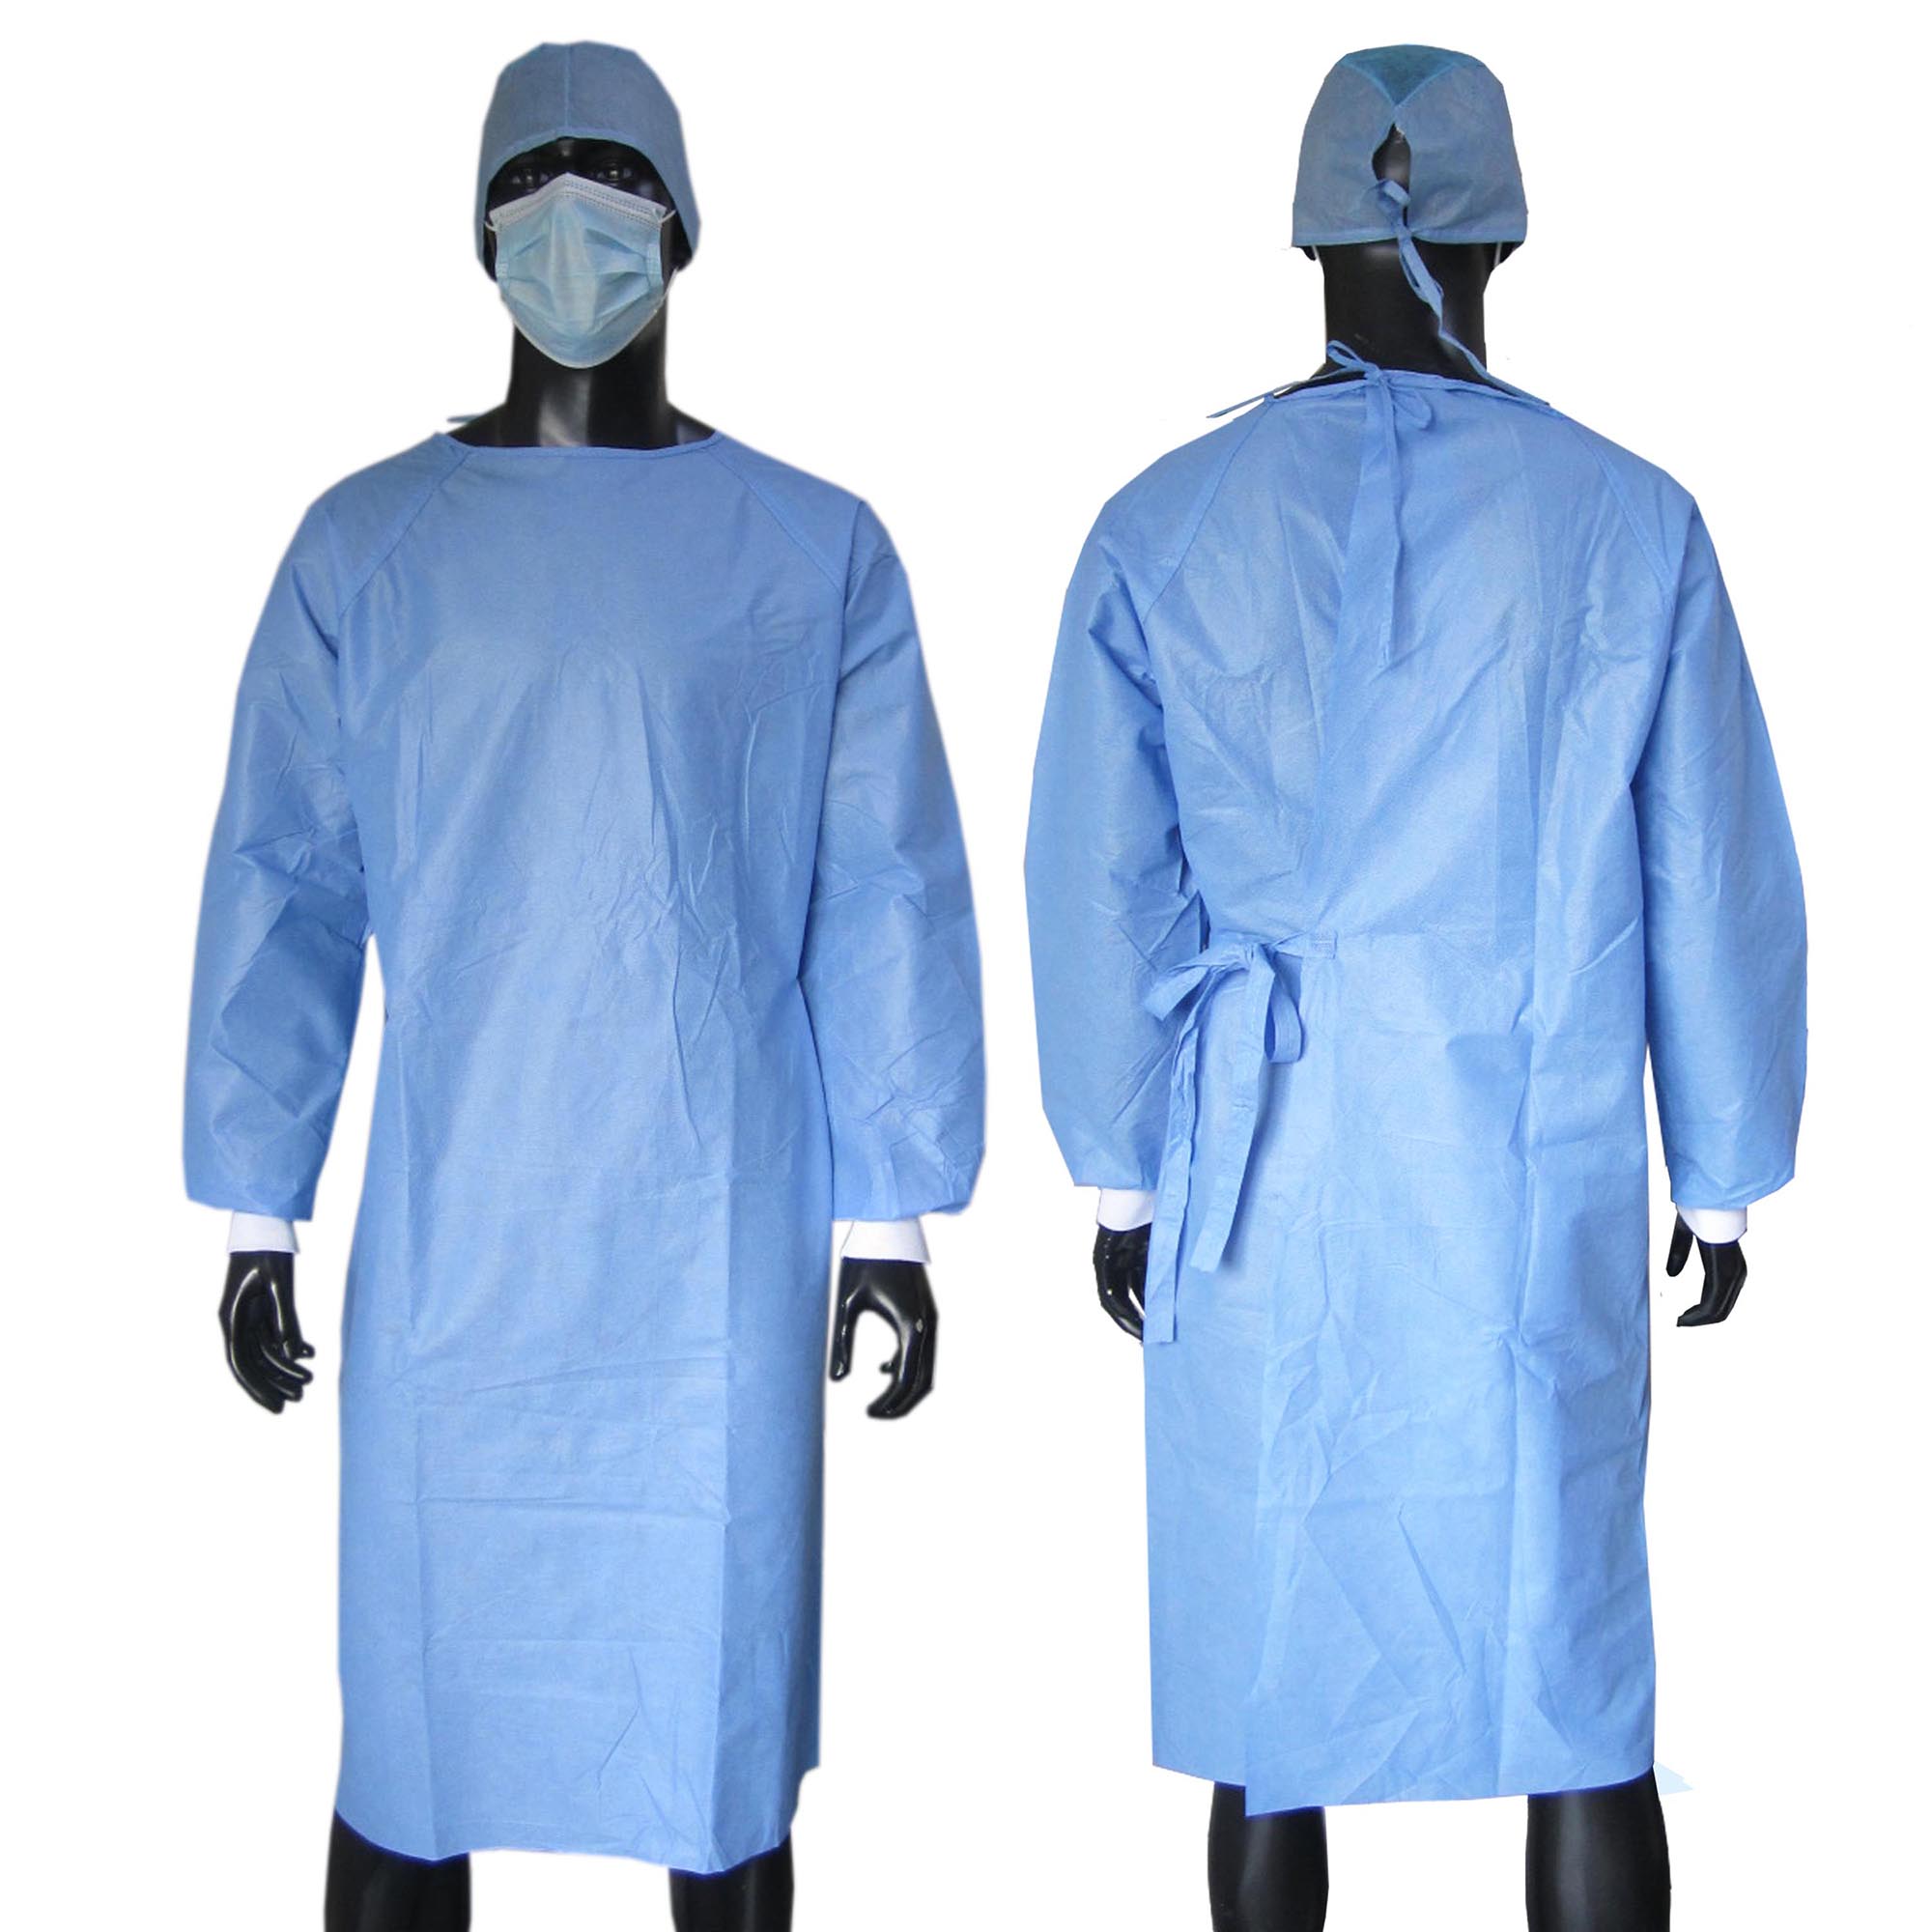 Surgical Hospital PP Protective Clothes